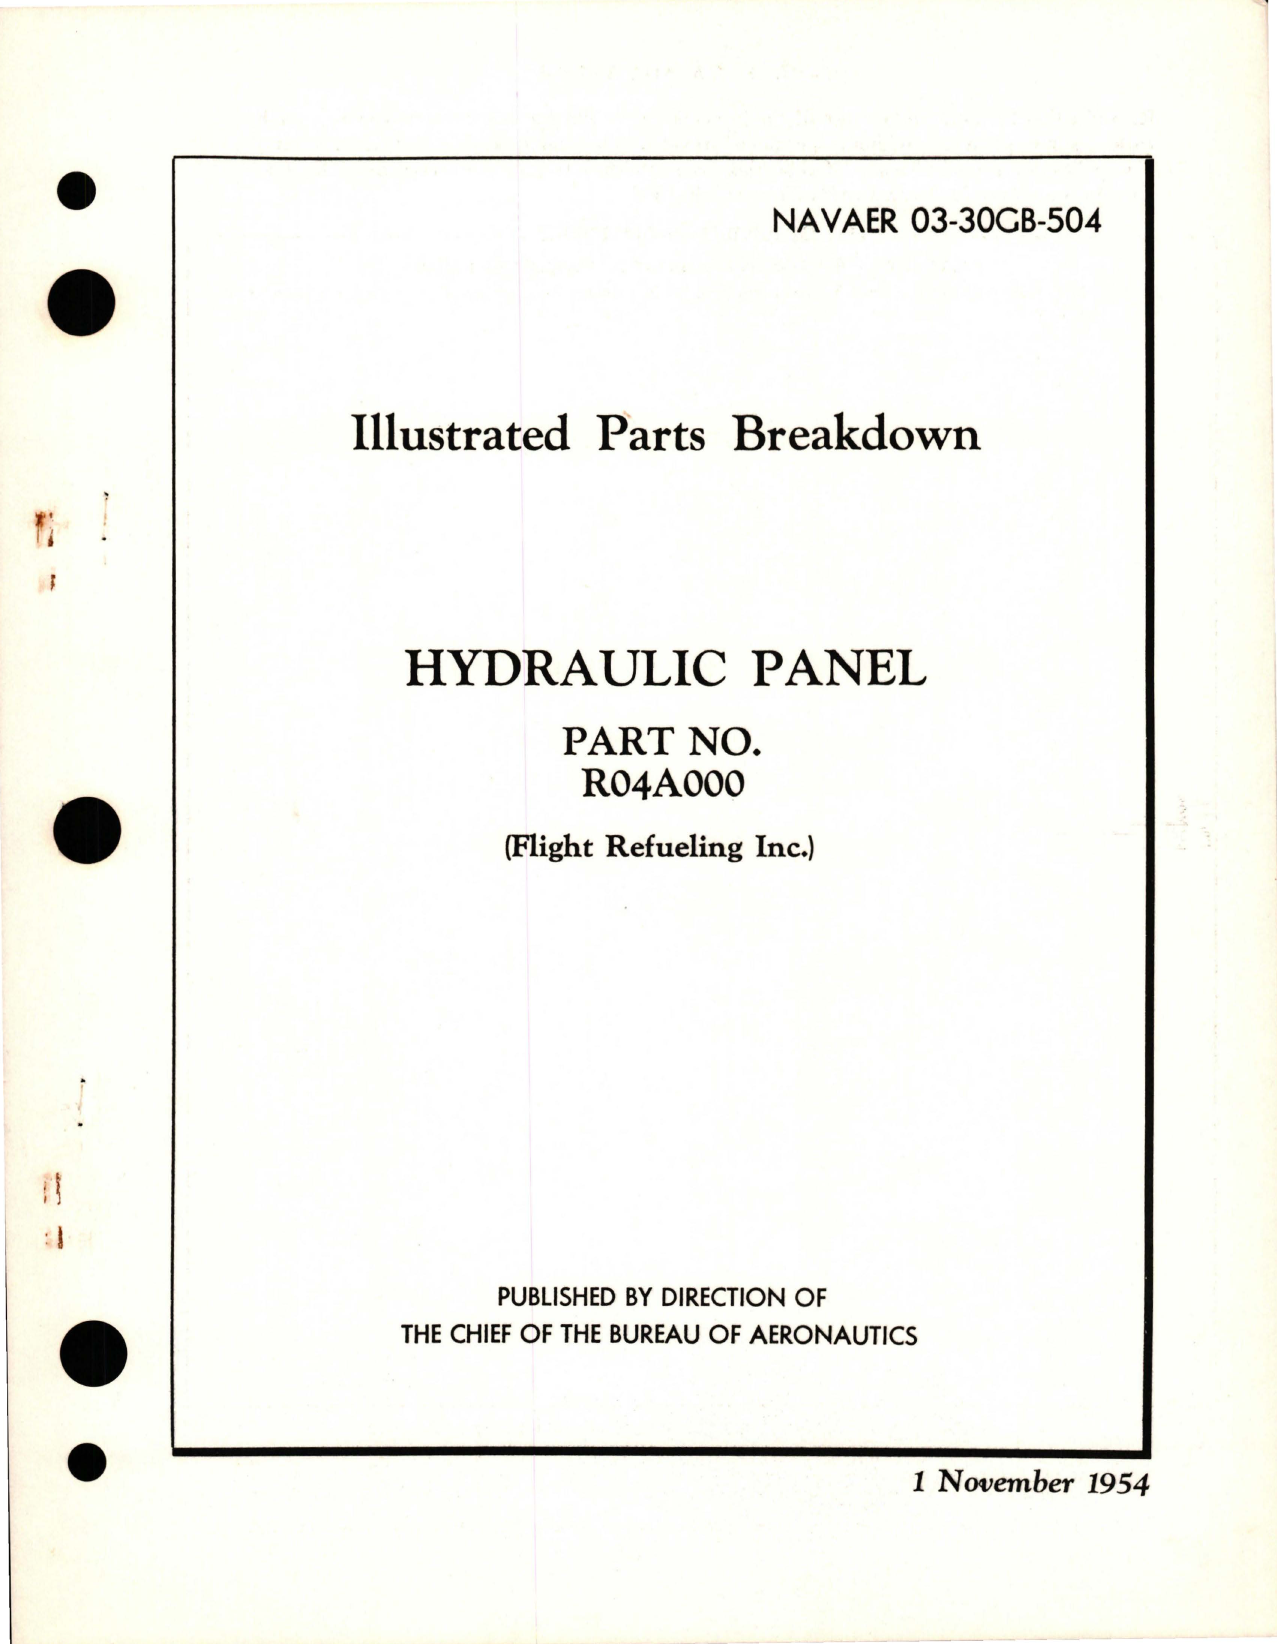 Sample page 1 from AirCorps Library document: Illustrated Parts Breakdown for Hydraulic Panel - Parts R04A000